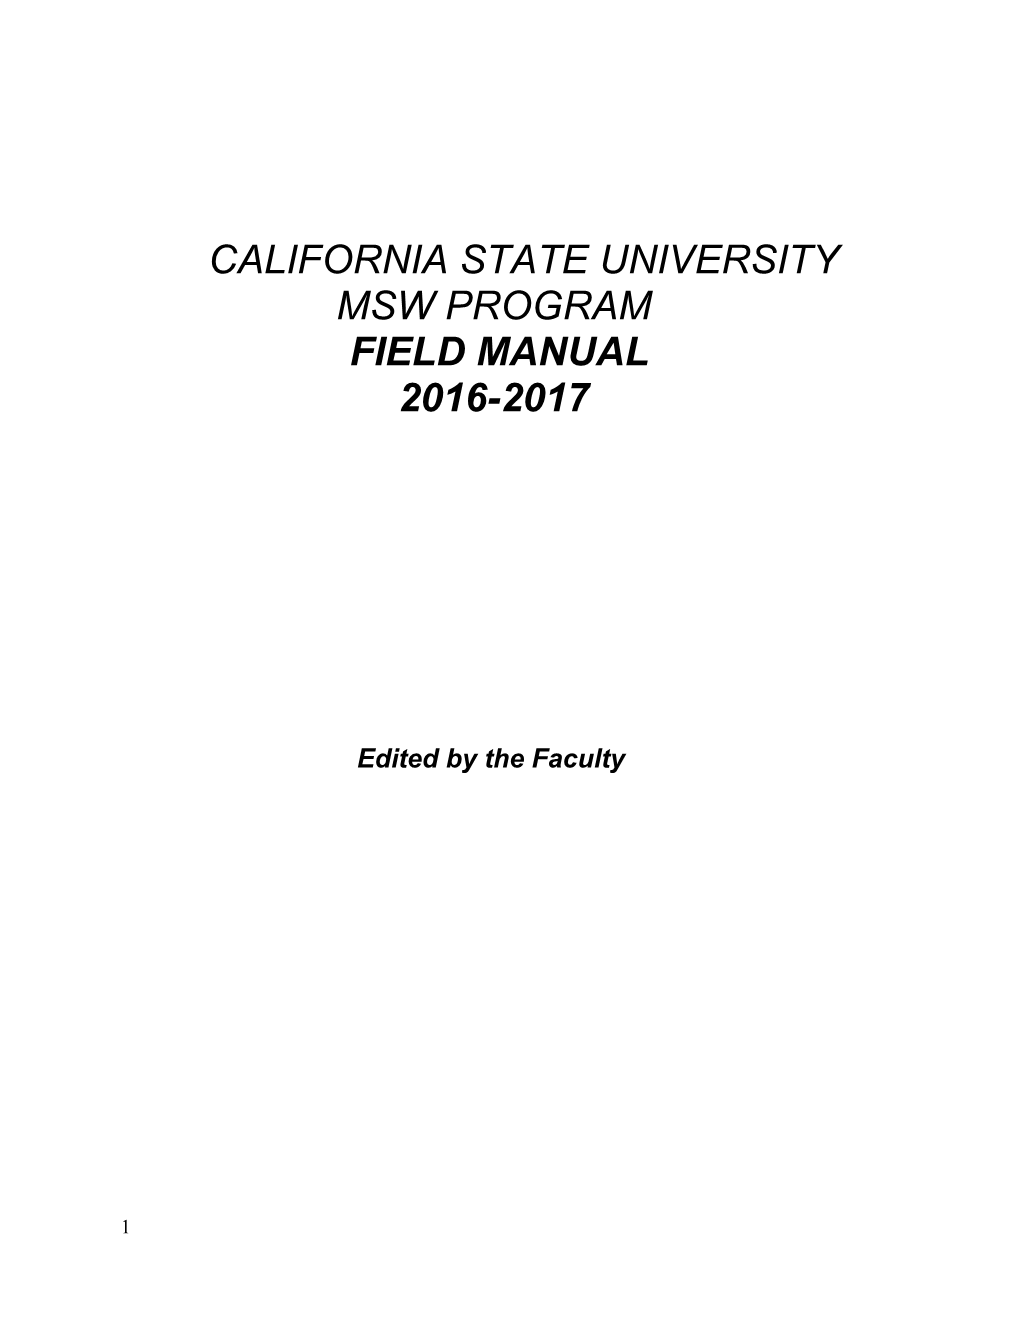 Field Manual Section